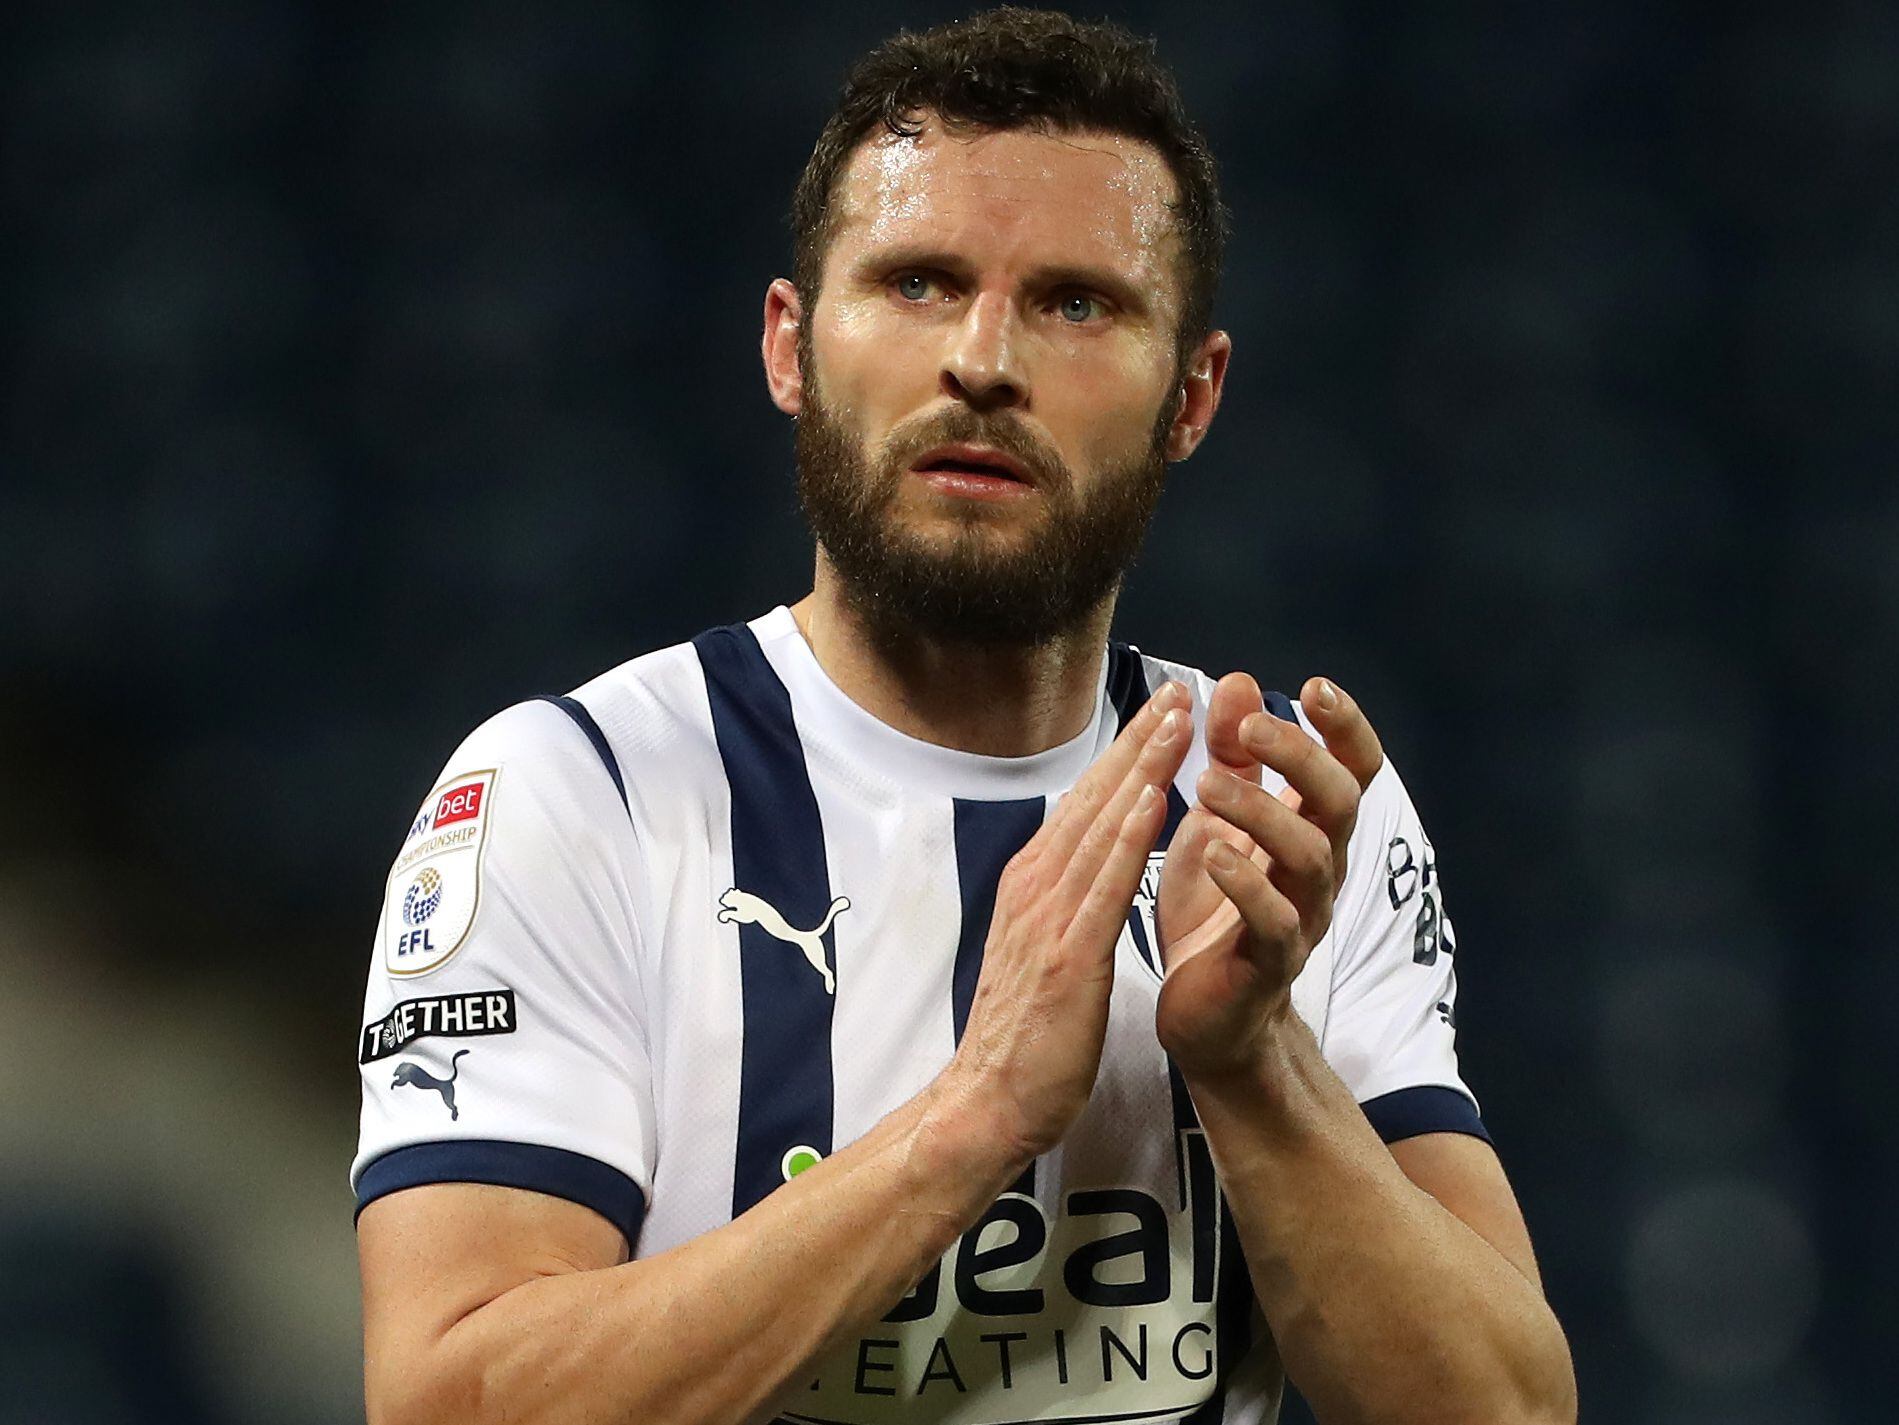 West Brom make right call with worthy praise amid little fanfare